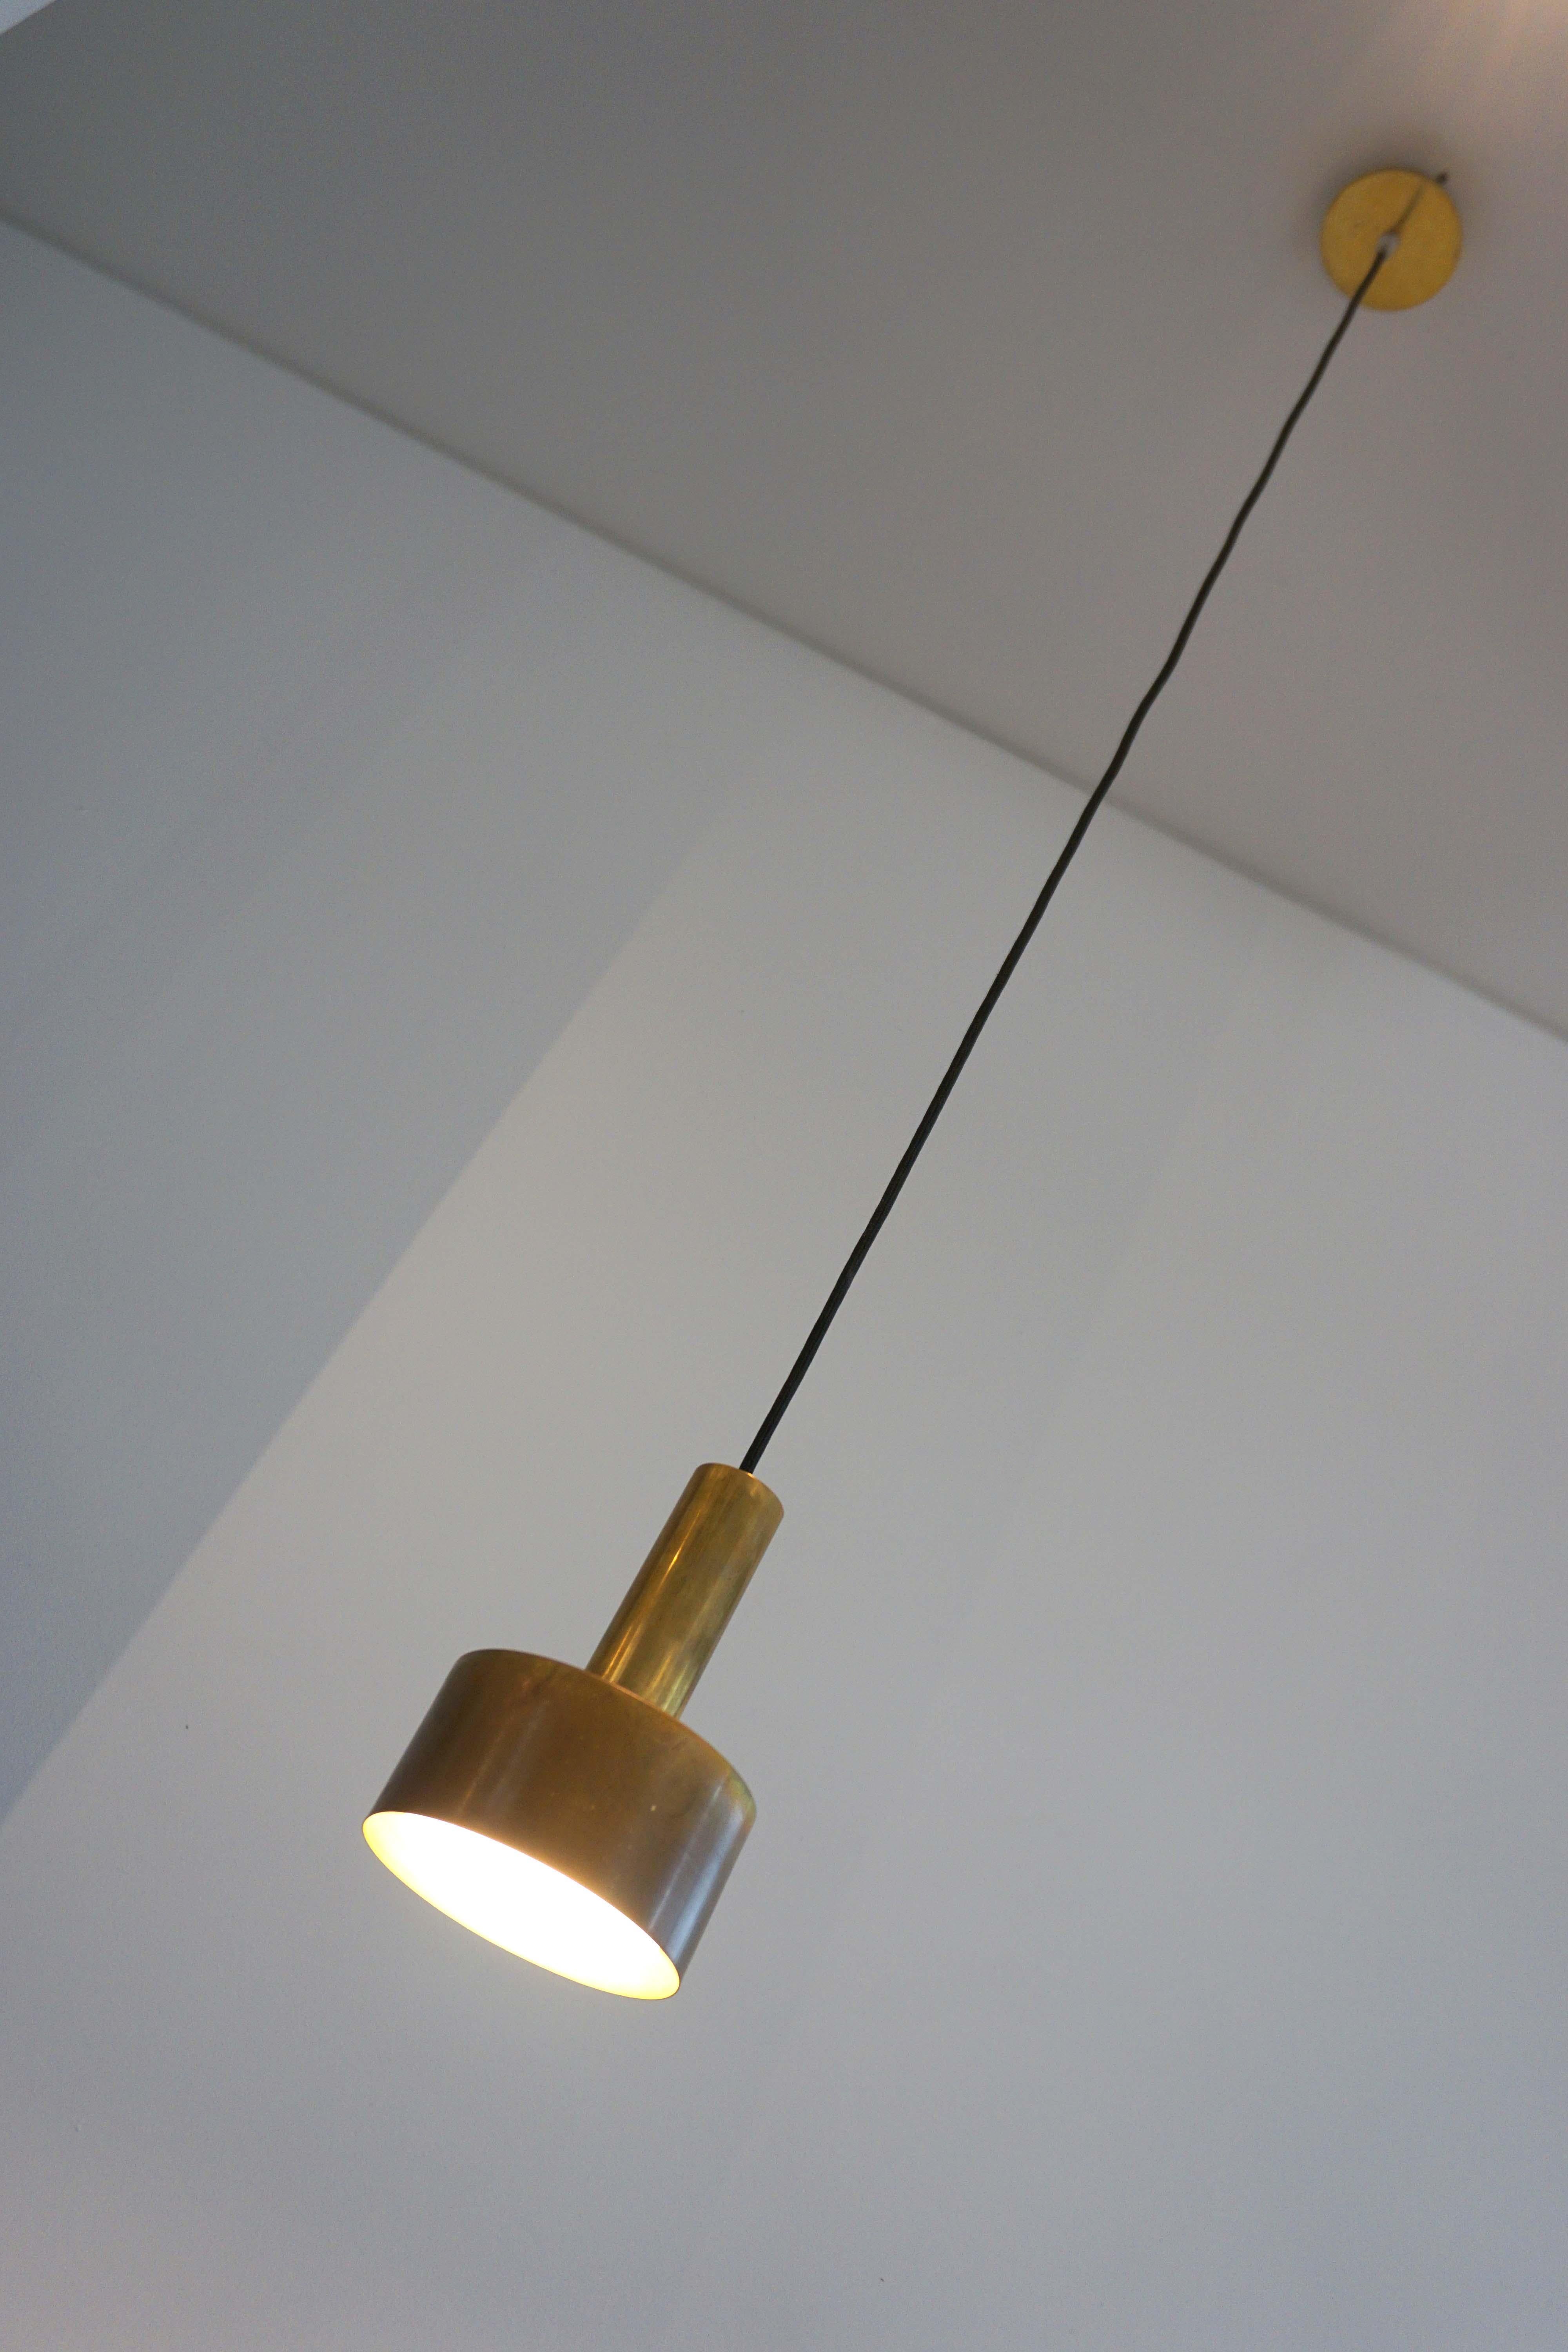 Italian Natural Brass Contemporary-Modern Pendant Light Handcrafted in Italy by 247lab For Sale